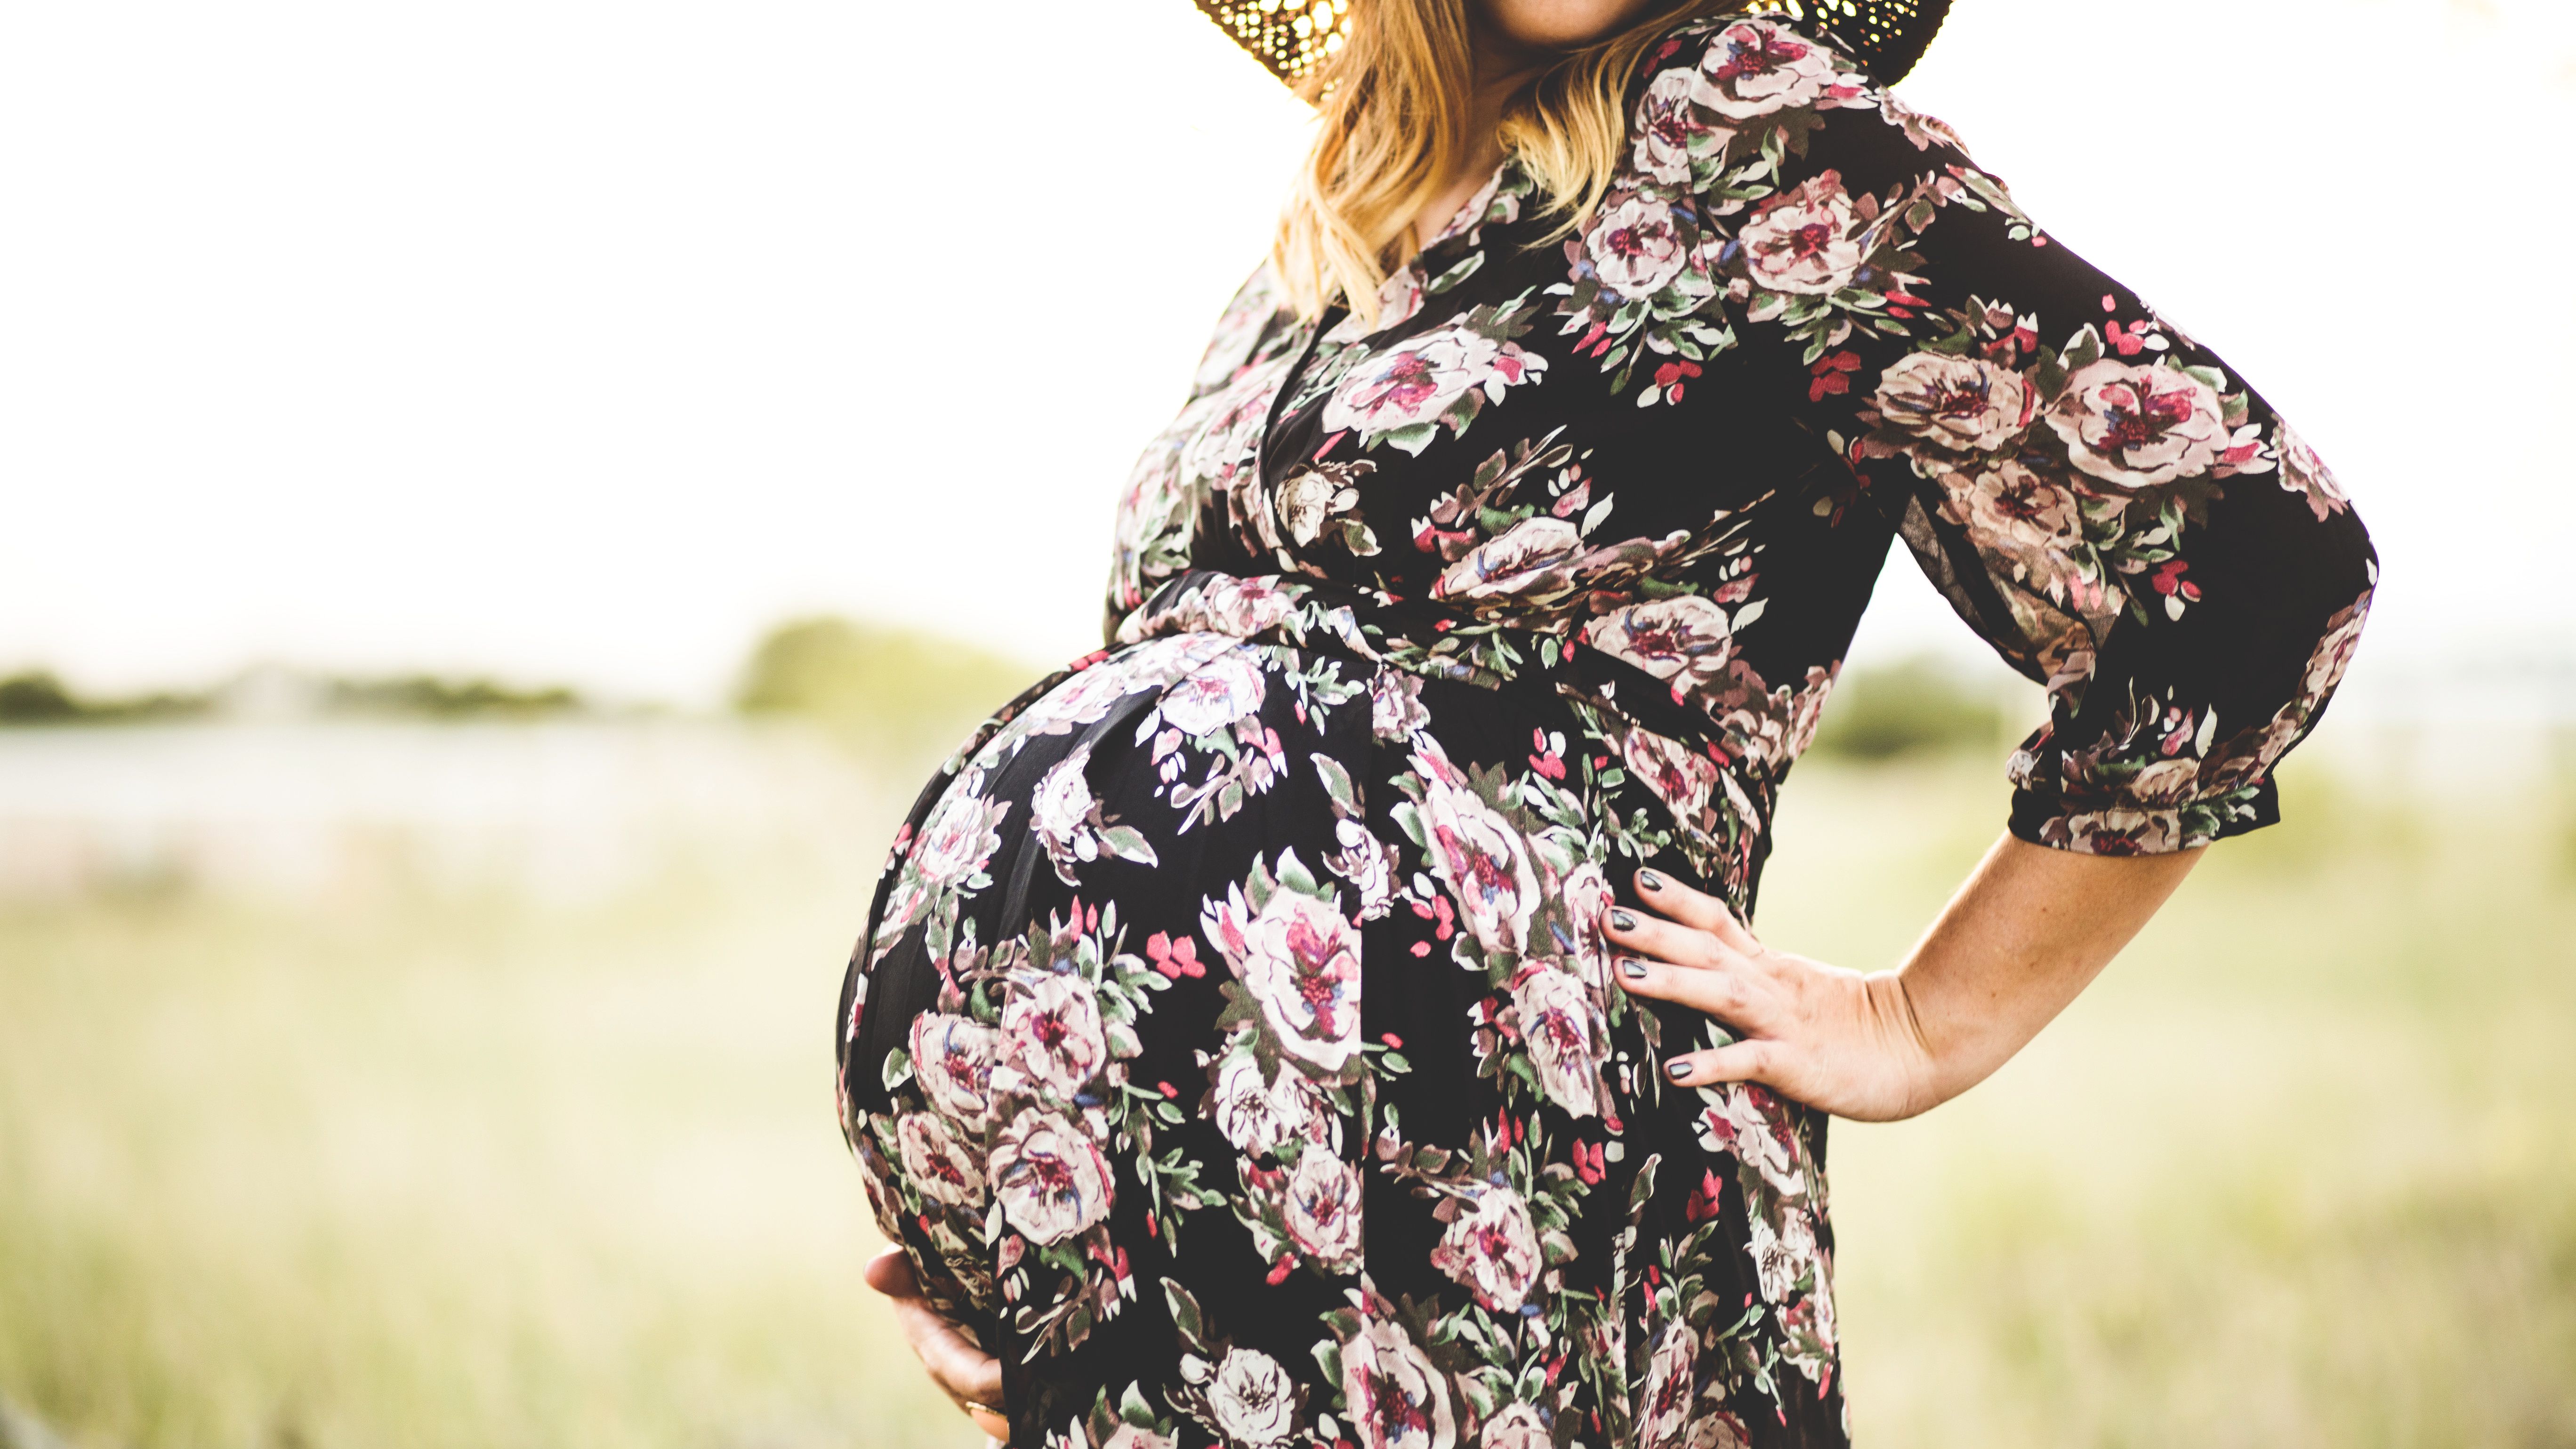 The Best Places to Buy Cute Maternity Clothes at All Price Points